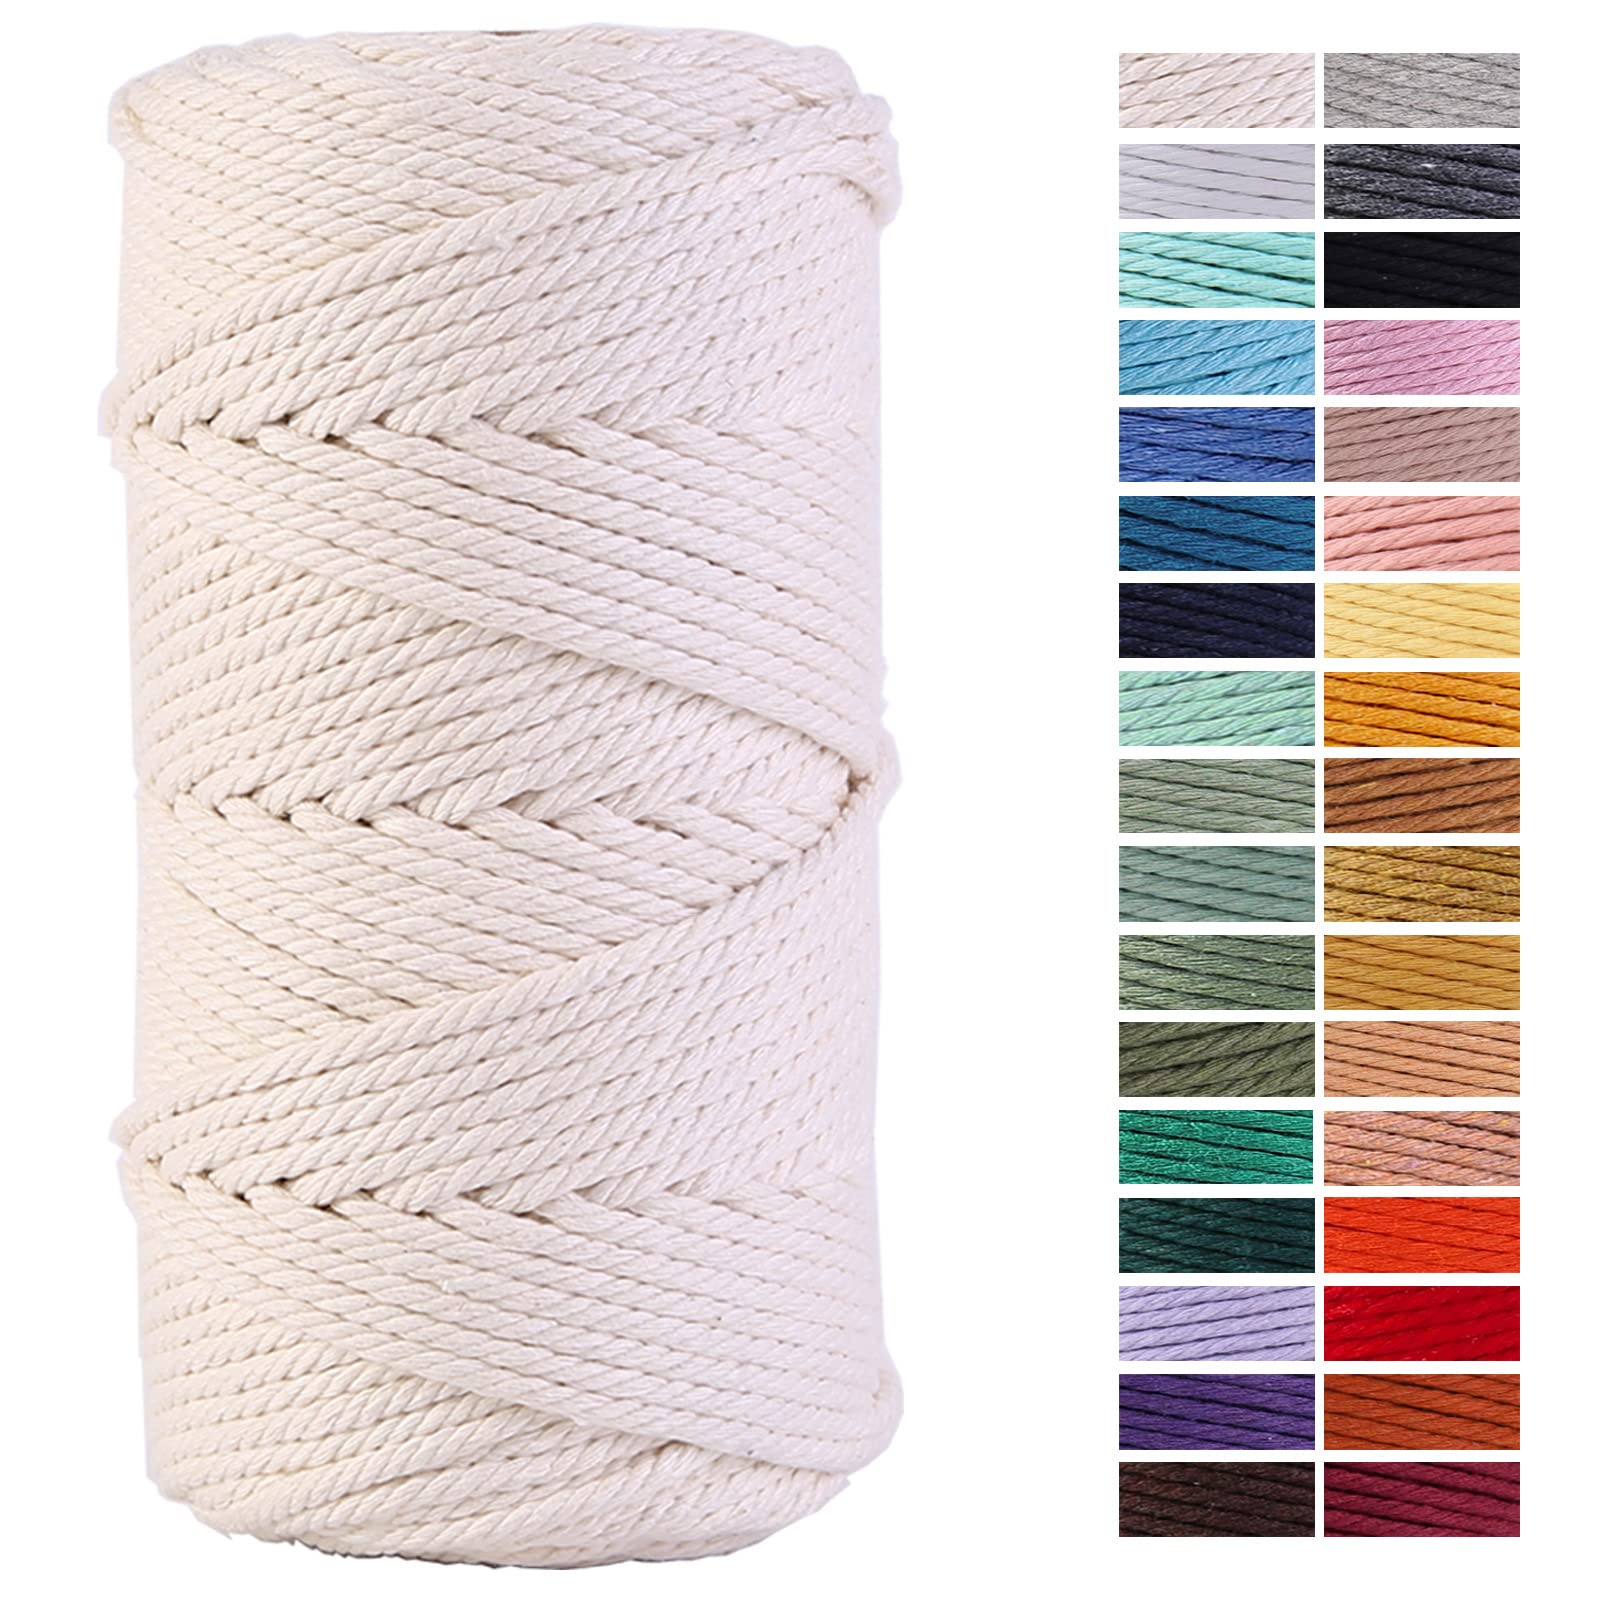 ZXCDINO Macrame cord 3mm x 109Yards 100% Natural cotton Macrame Rope cotton  cord for Handmade